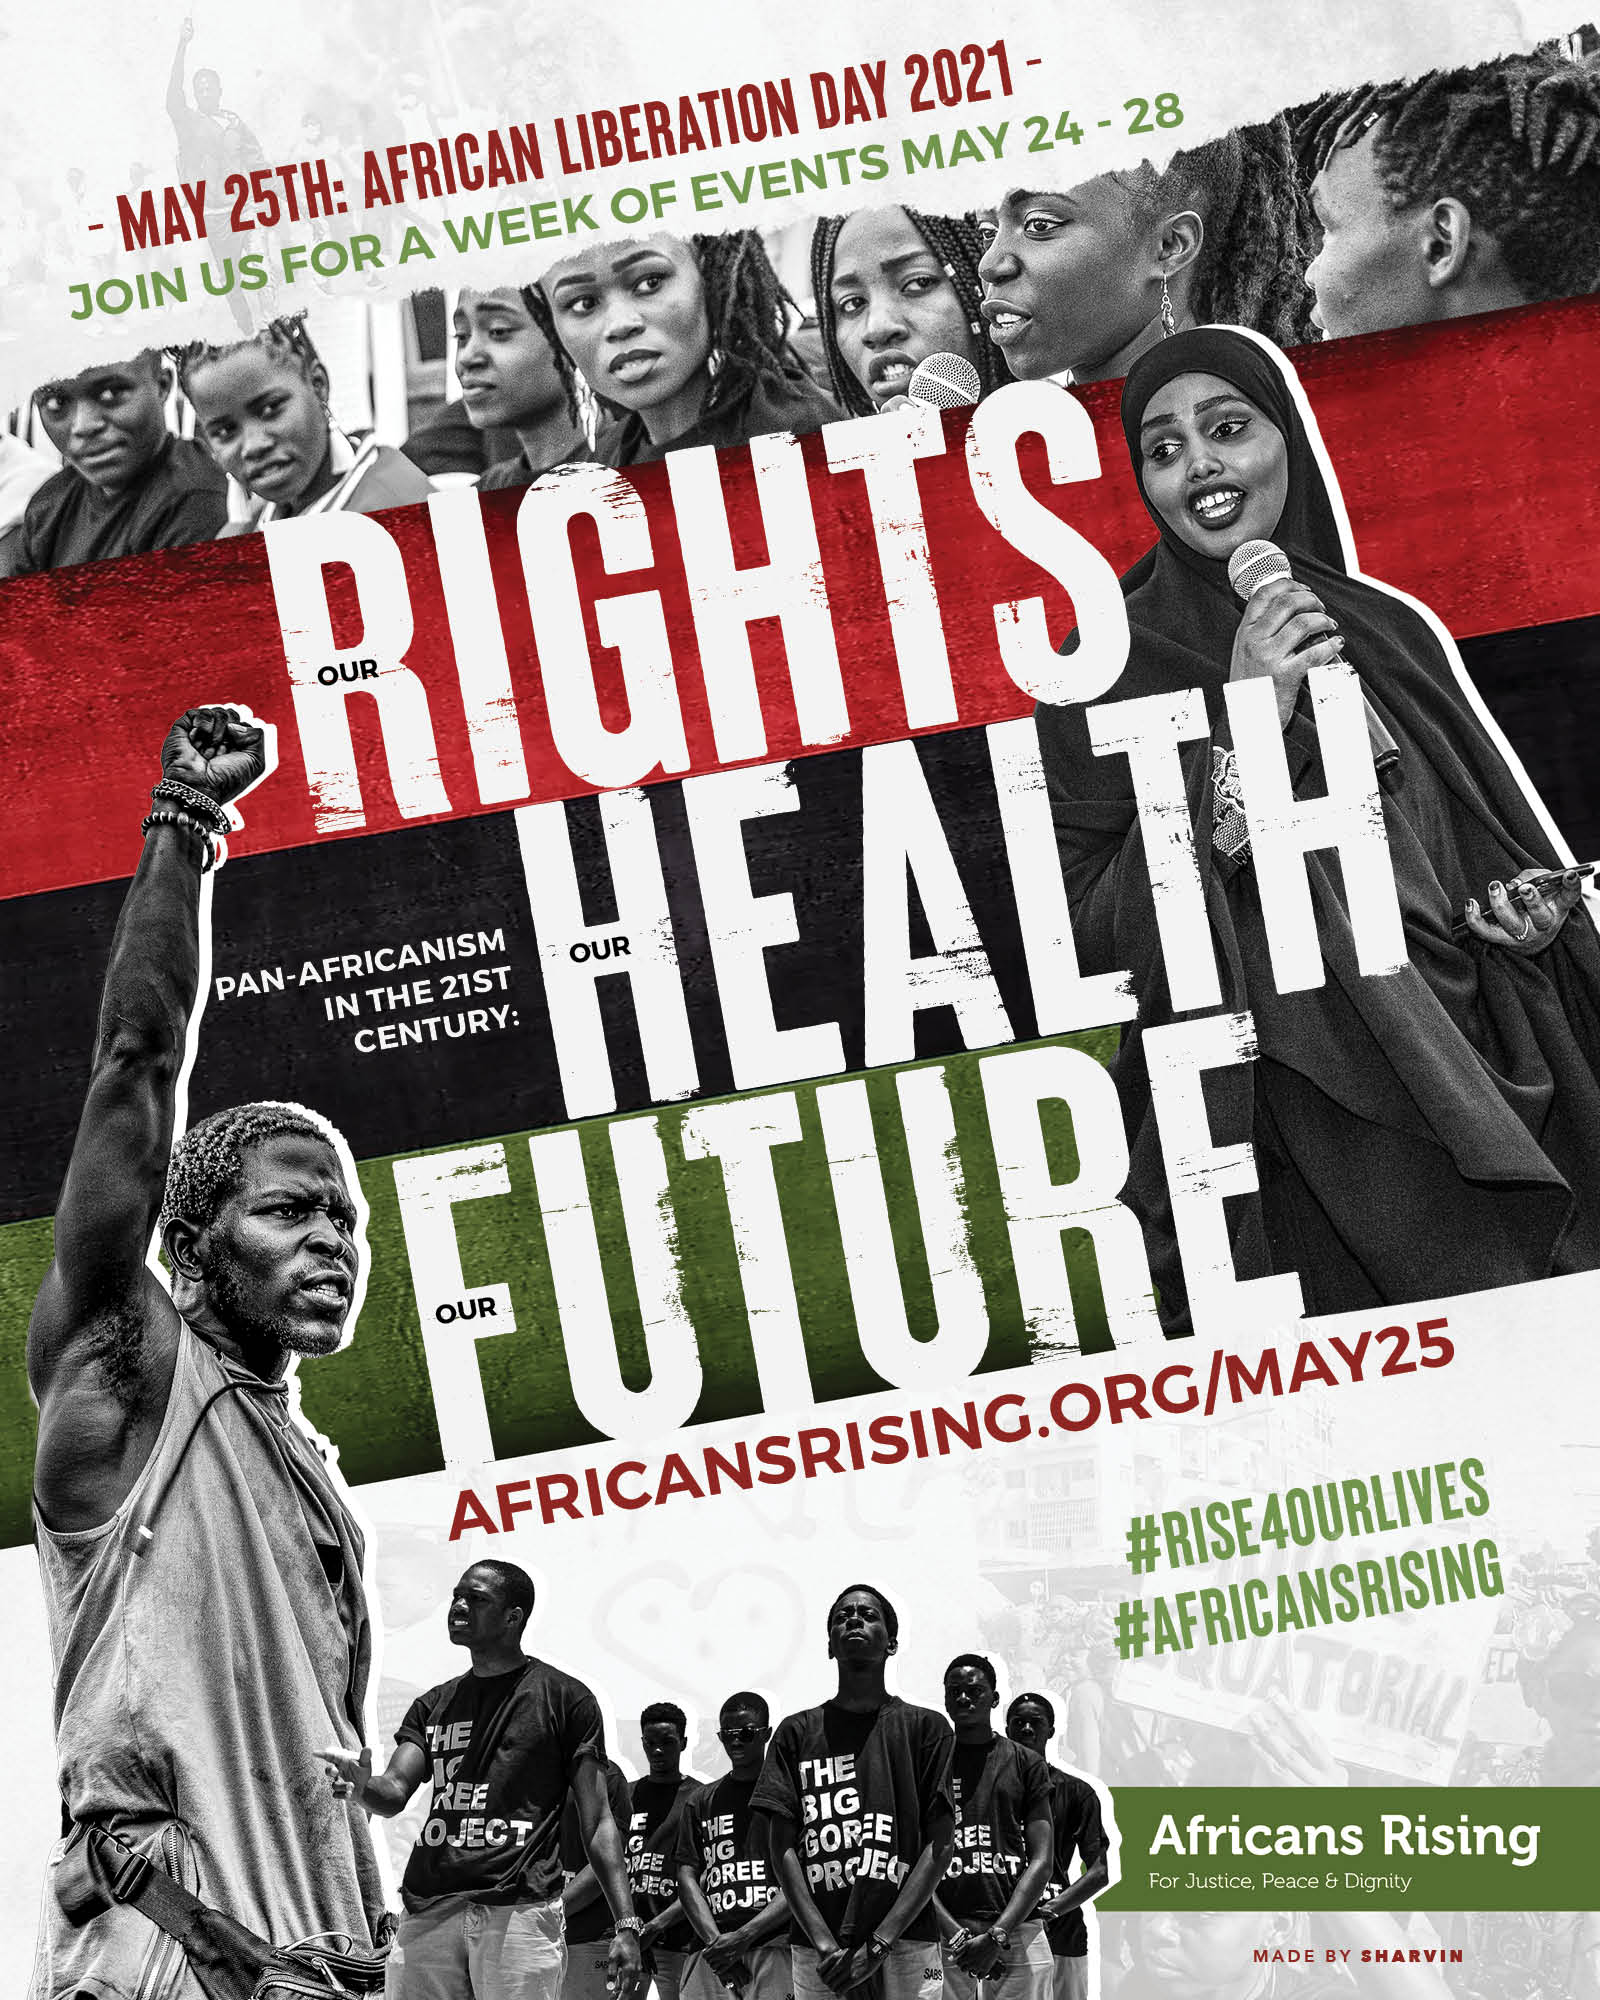 Pan-Africanism in the 21st Century: Our Rights, Our Health, Our Future - #Rise4OurLives